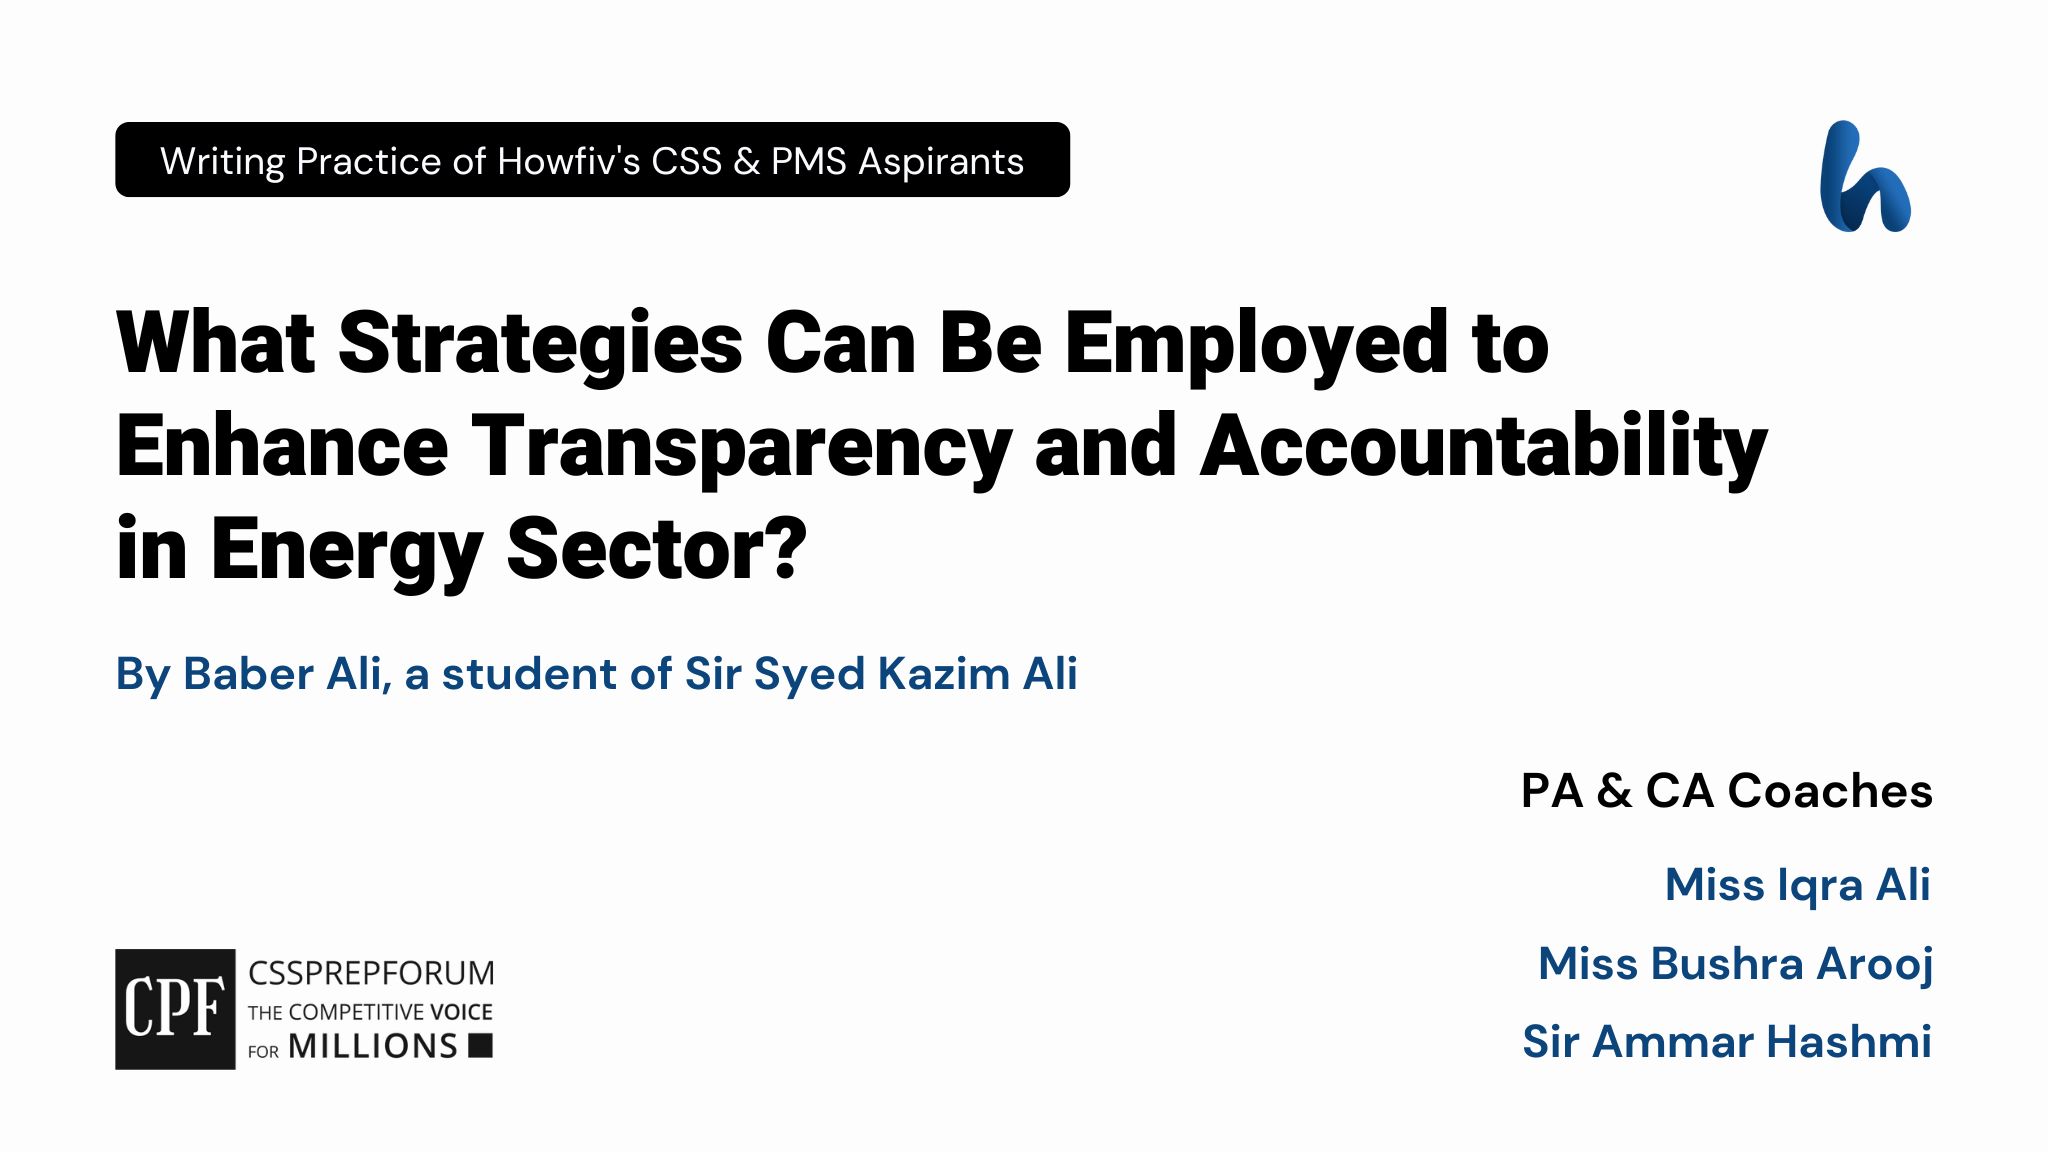 CSS Current Affairs article | Strategies to Enhance Transparency and Accountability in Energy Sector | is written by Baber Ali under the supervision of Sir Ammar Hashmi...